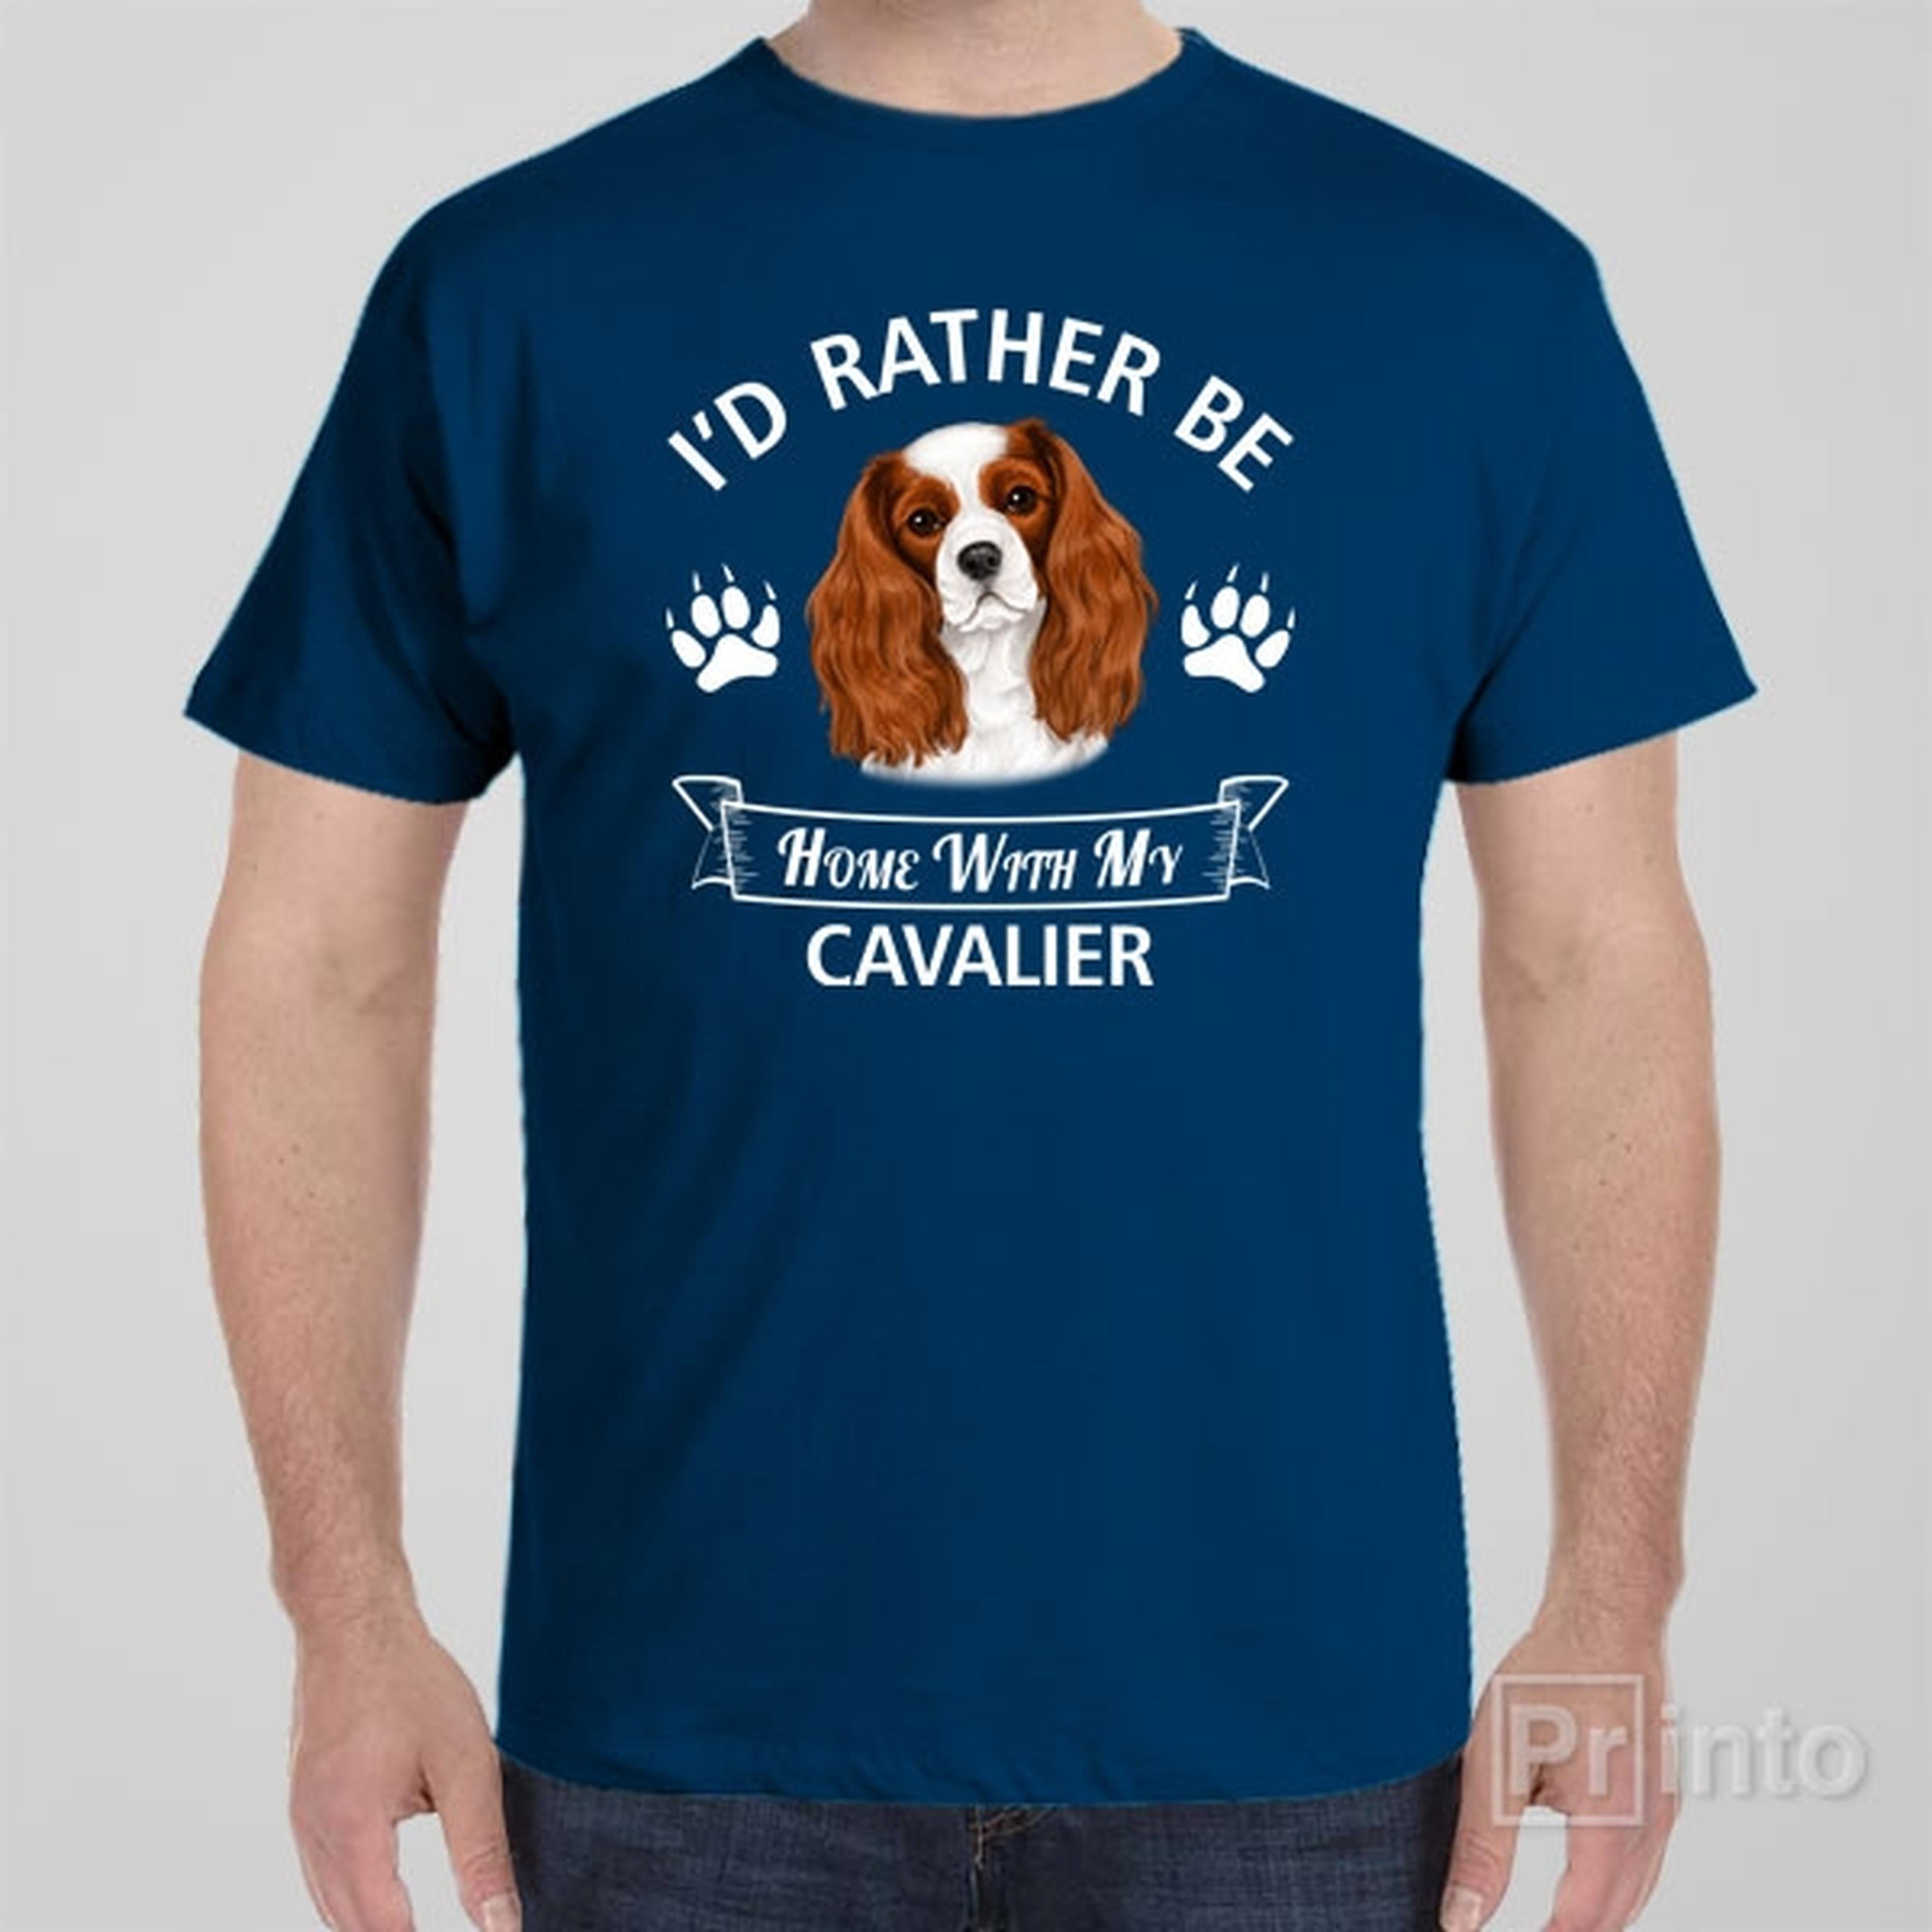 id-rather-stay-home-with-my-cavalier-t-shirt